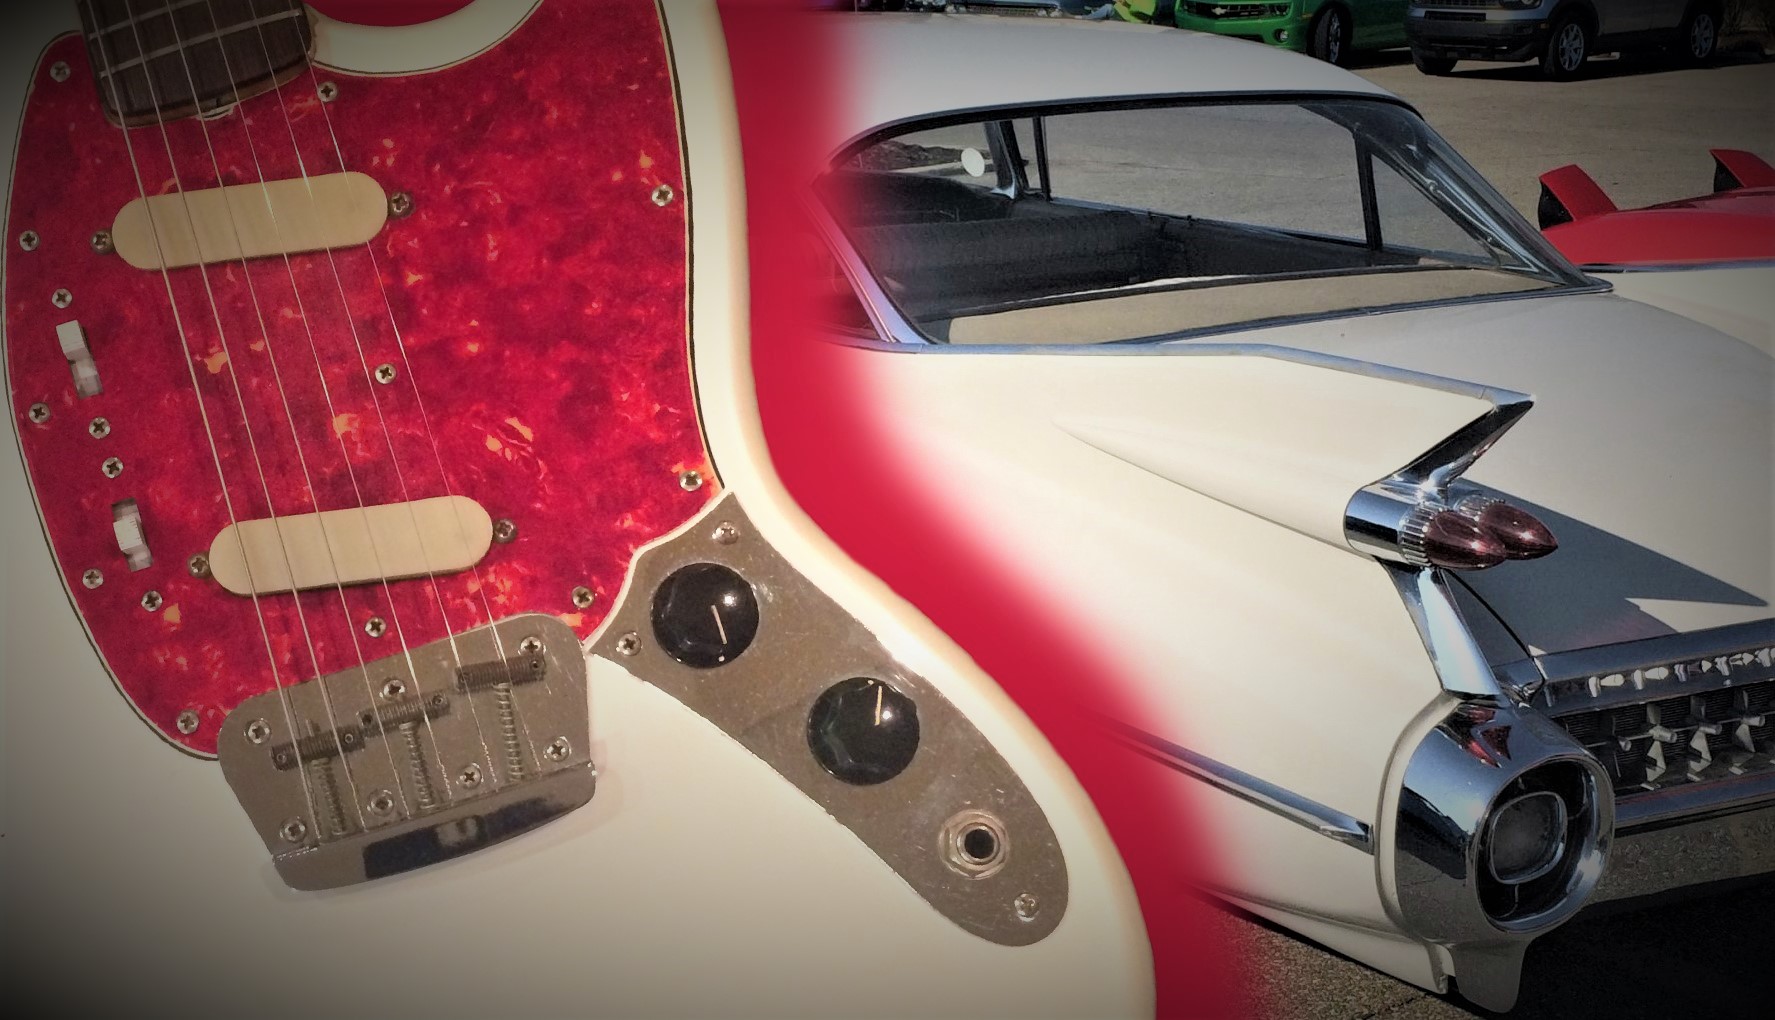 https://www.onallcylinders.com/wp-content/uploads/2022/08/10/1966-1960-cadillac-and-fender-duo-sonic-electric-guitar-composite-image.jpg